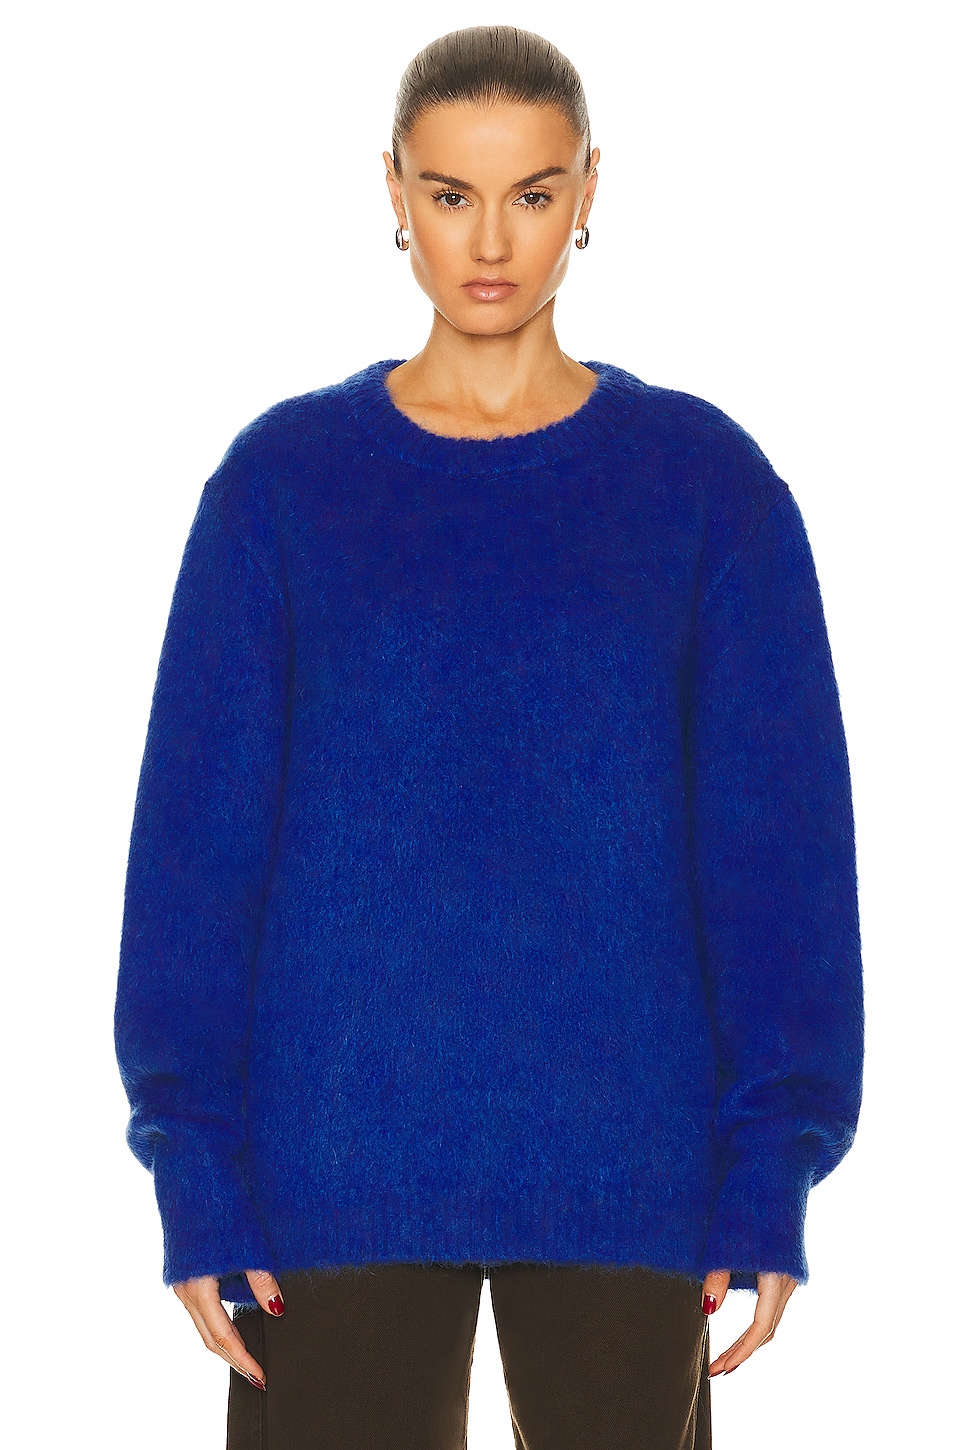 Lemaire Brushed Sweater in Electric Blue | FWRD